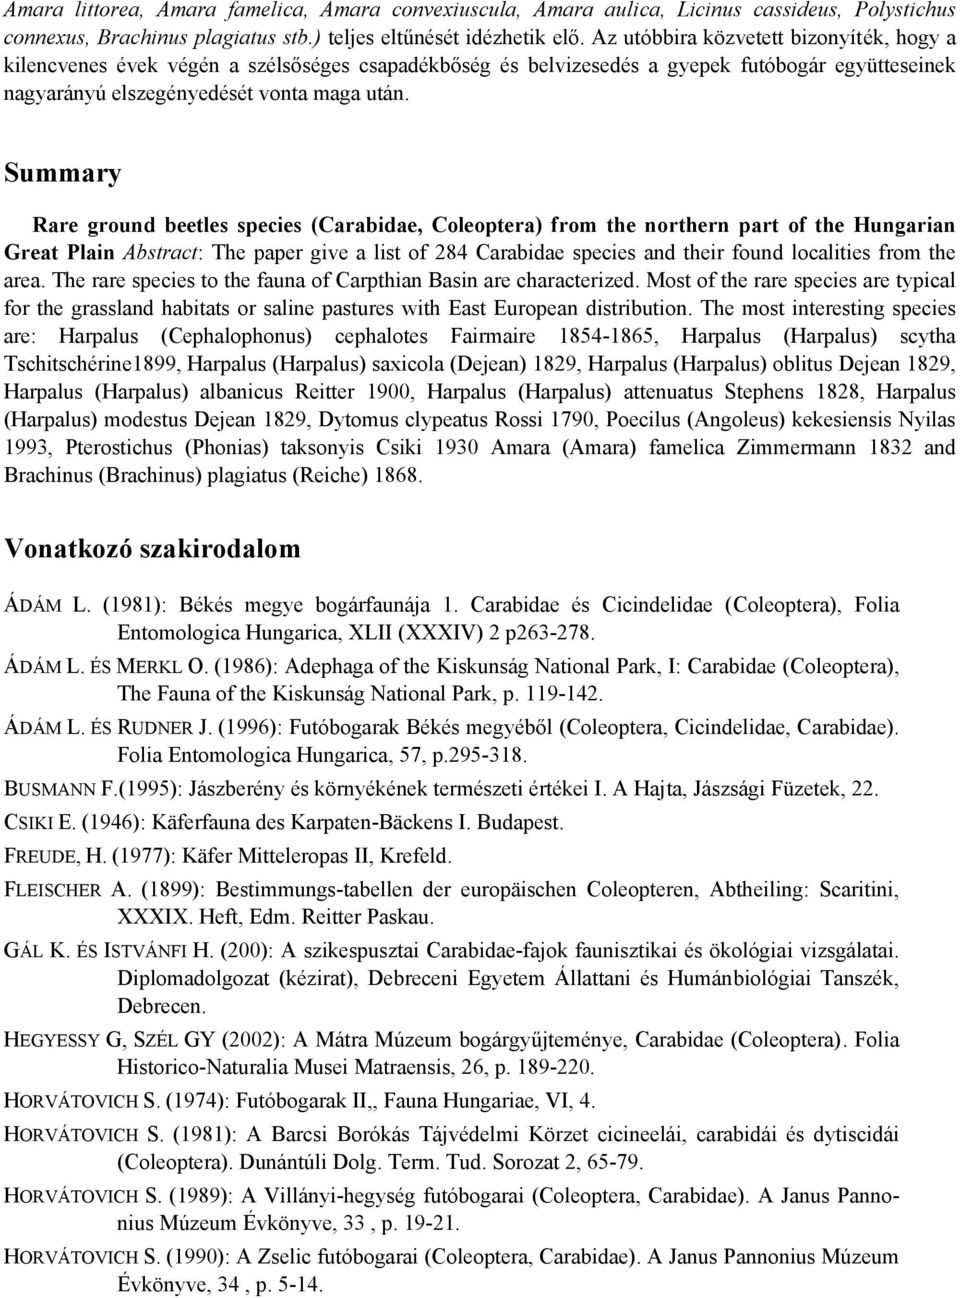 Summary Rare ground beetles species (Carabidae, Coleoptera) from the northern part of the Hungarian Great Plain Abstract: The paper give a list of 284 Carabidae species and their found localities